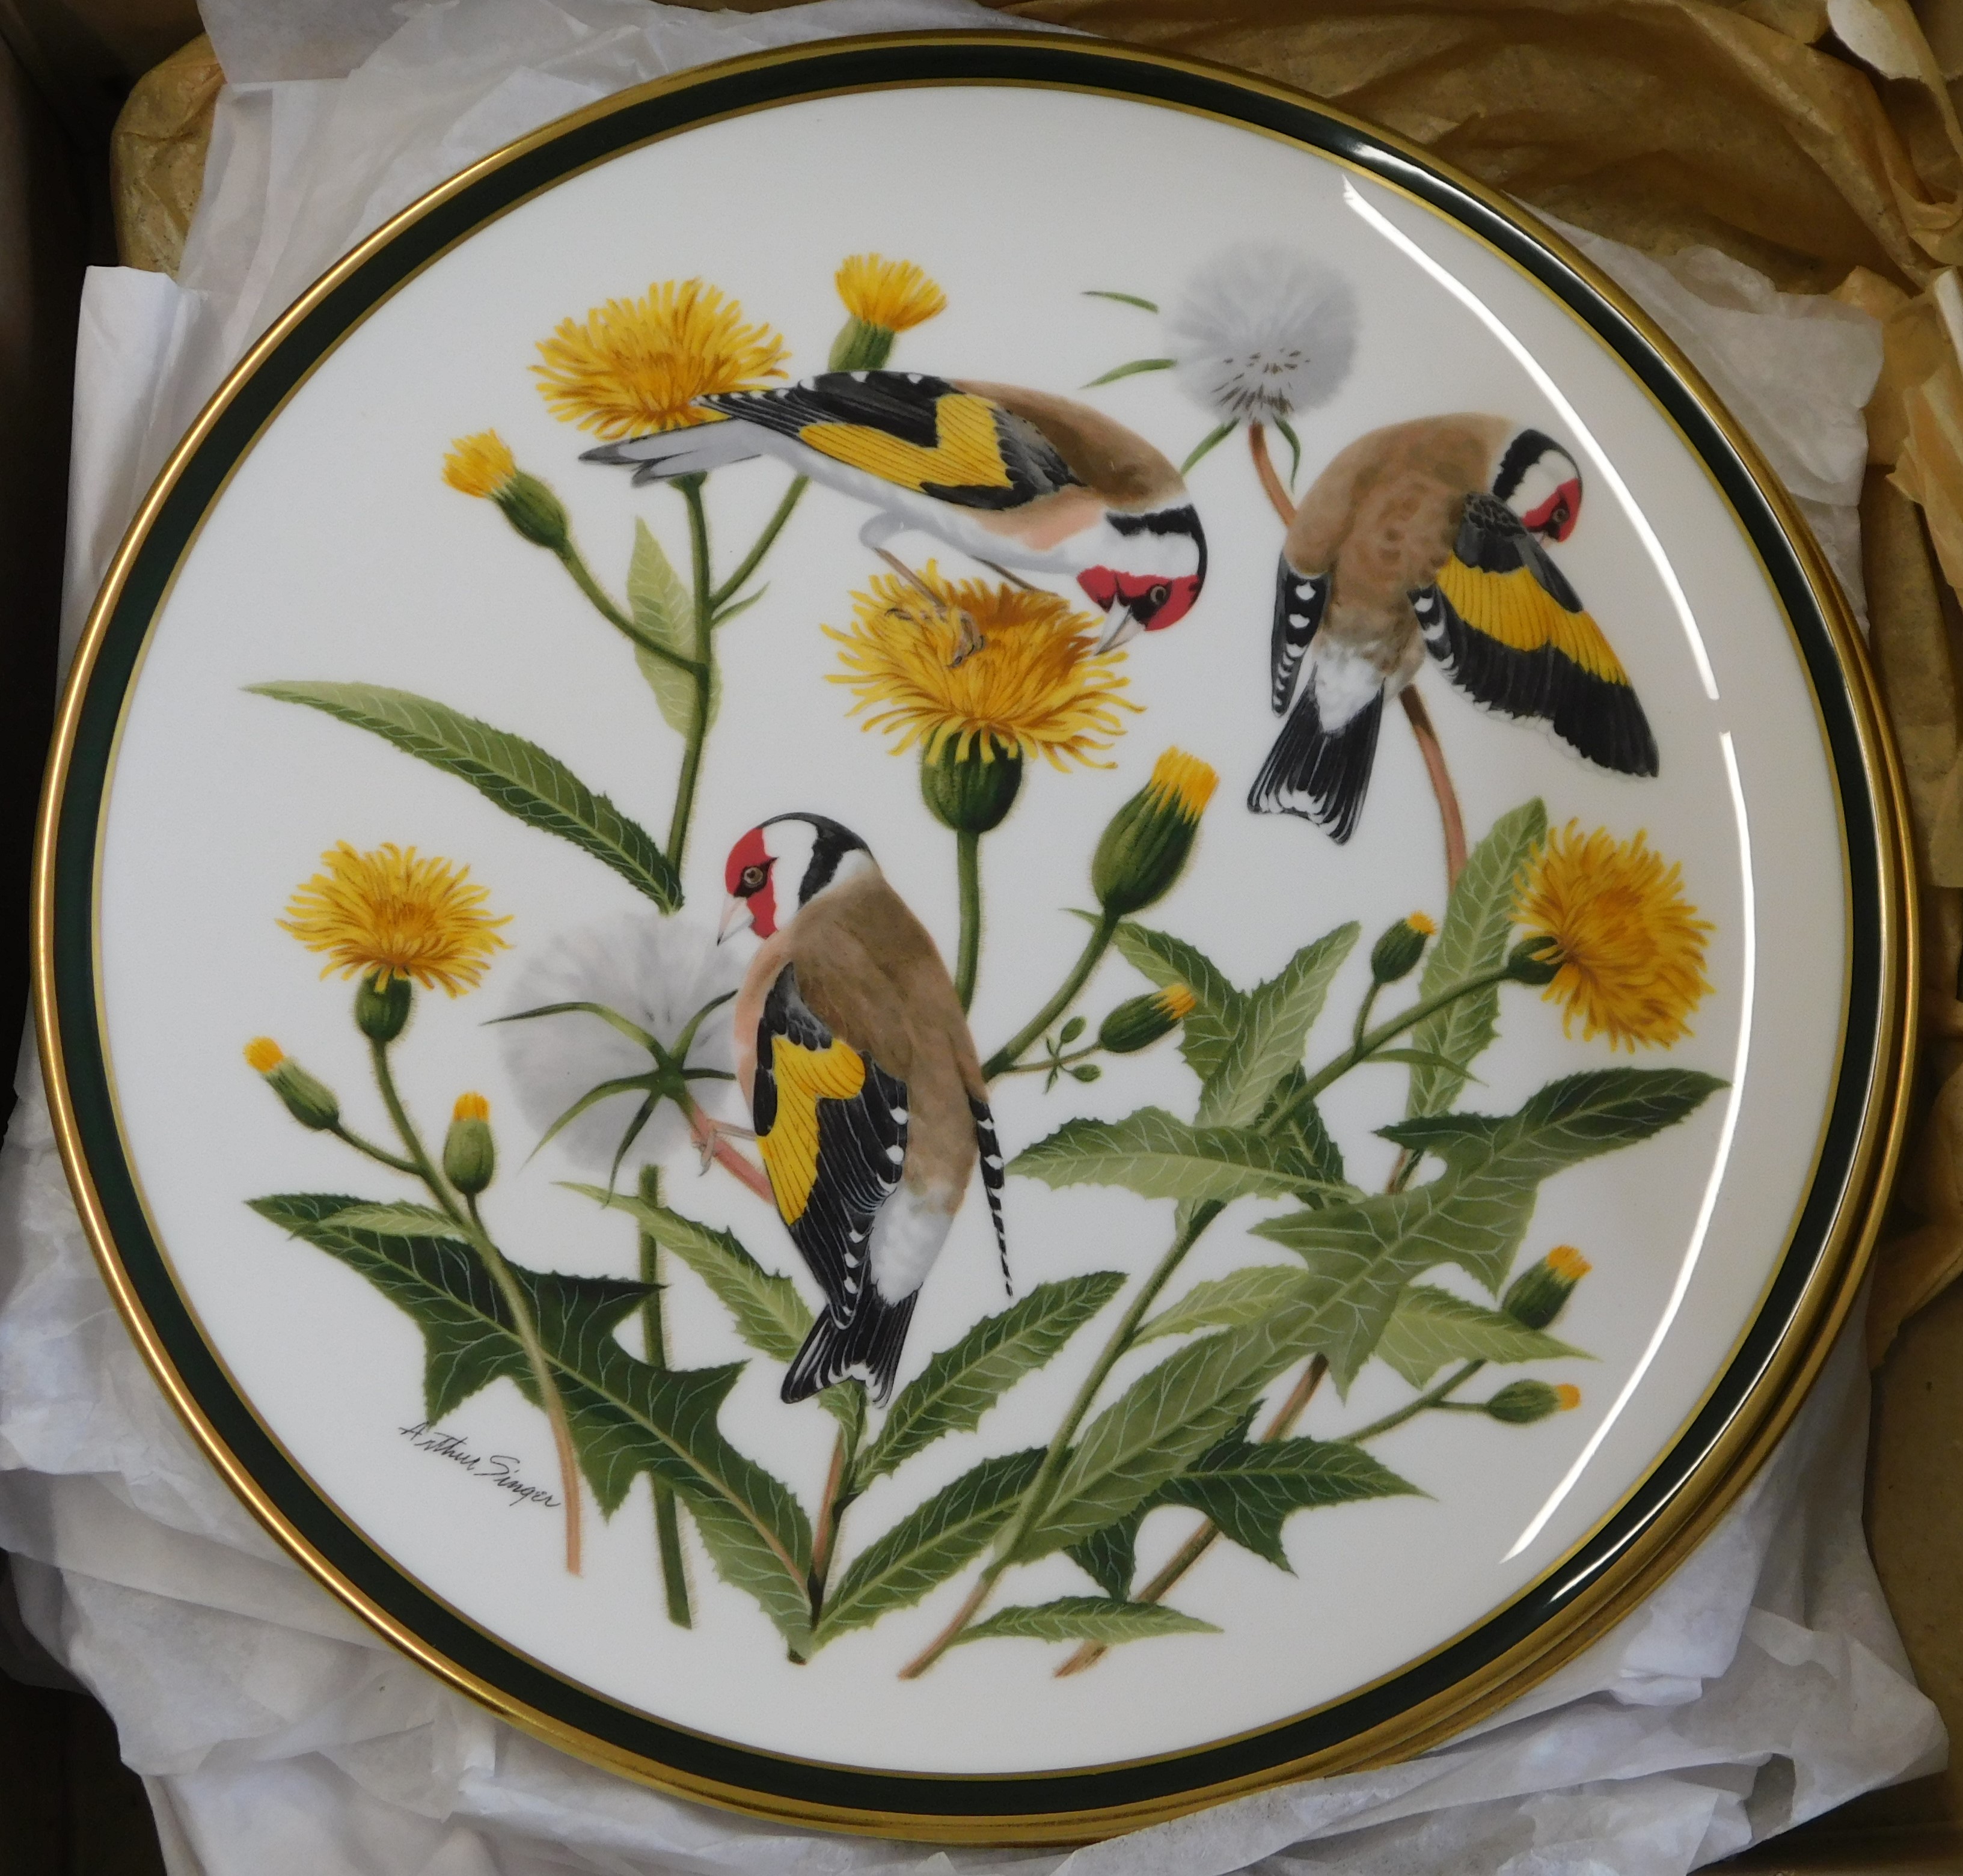 Plates (8) - 'Songbirds of the World' Franklin Porcelain crafted in England by Wedgewood 1977, - Image 3 of 5